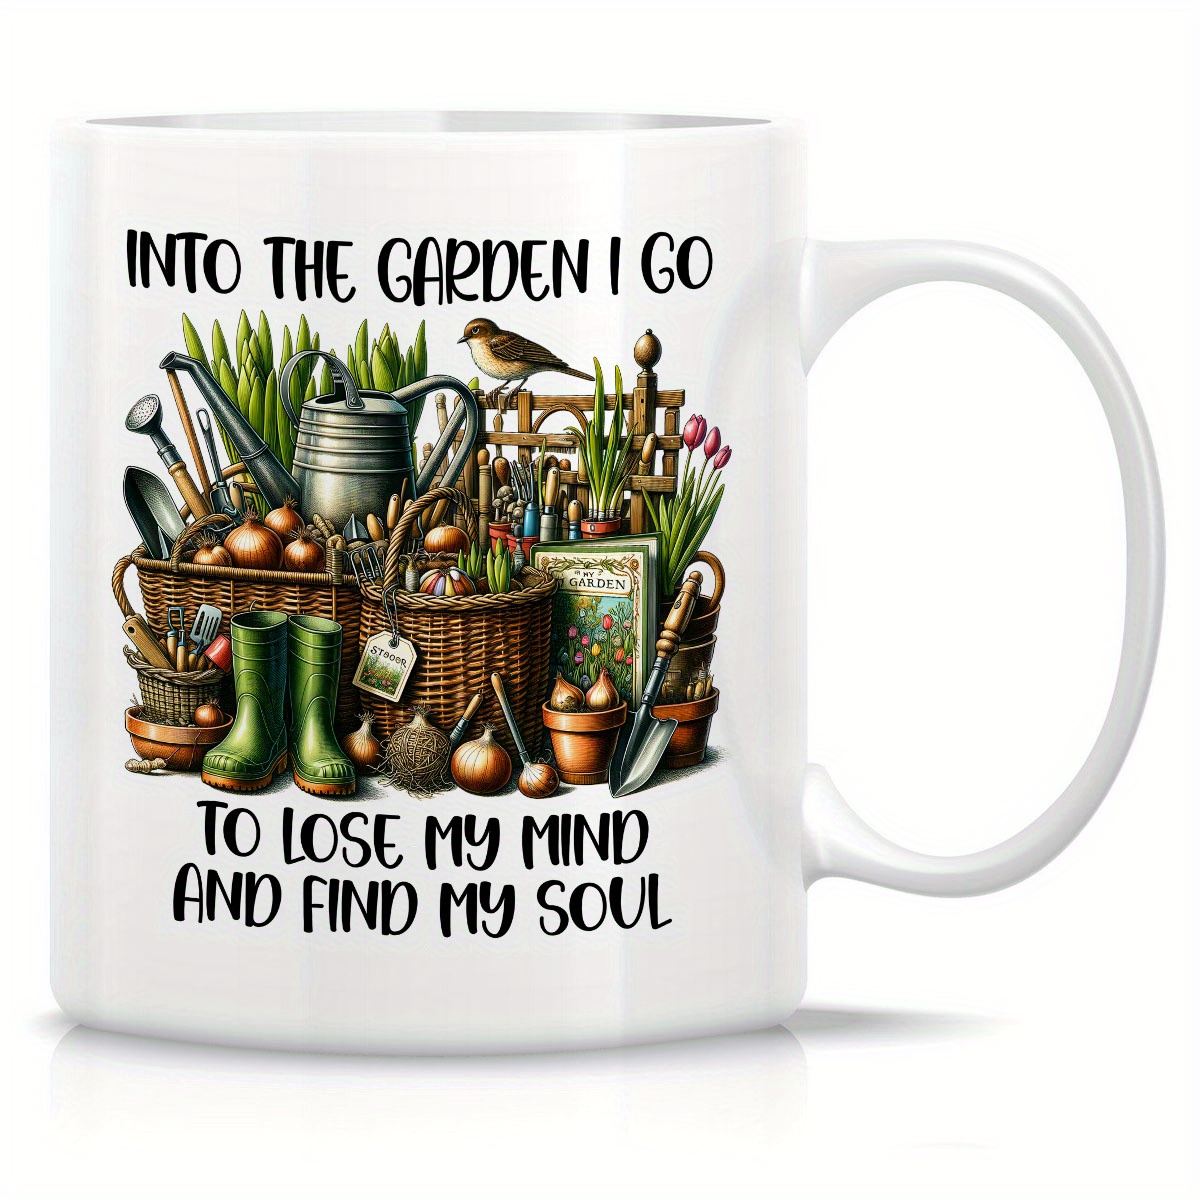 

1pc, Gardening Is My Therapy Mug Funny Coffee Mug Double Side Printed Coffee Mug - Gifts For Ts Merchandise - Novelty Coffee Mug, 11 Ounce Gifts For Friends, Coworkers, Siblings, Dad, Mom,daguhter